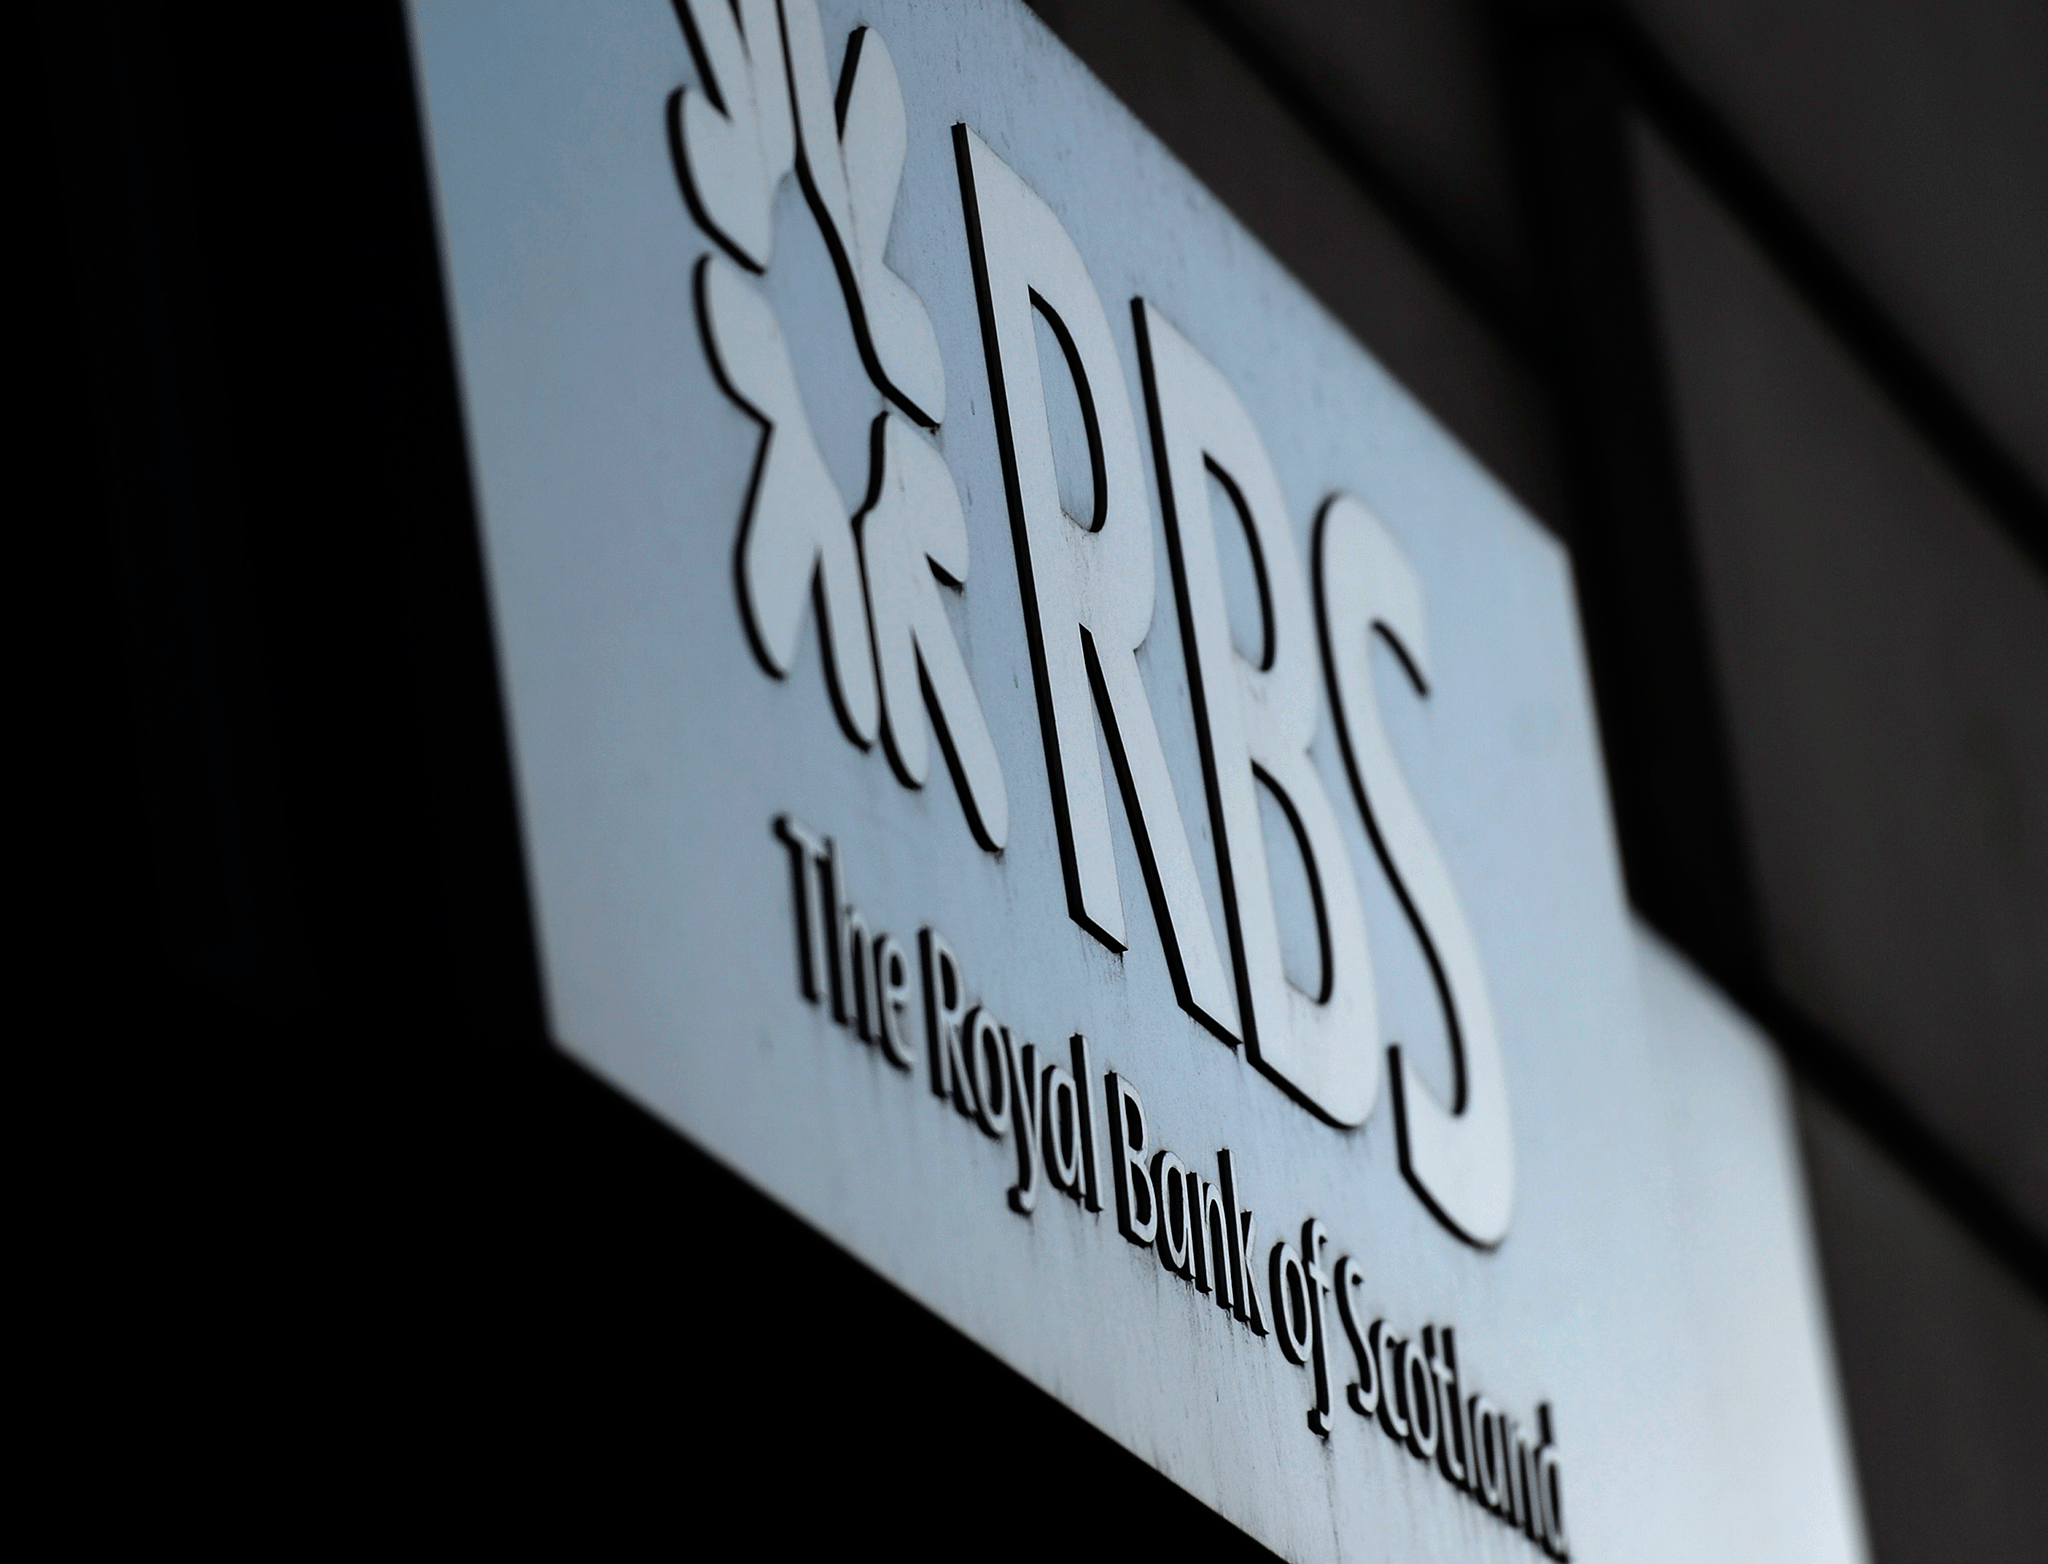 Ross McEwan, chief executive of RBS, responded to the publication of the summary by saying that he was “pleased” the most serious allegations made against the bank had not been upheld